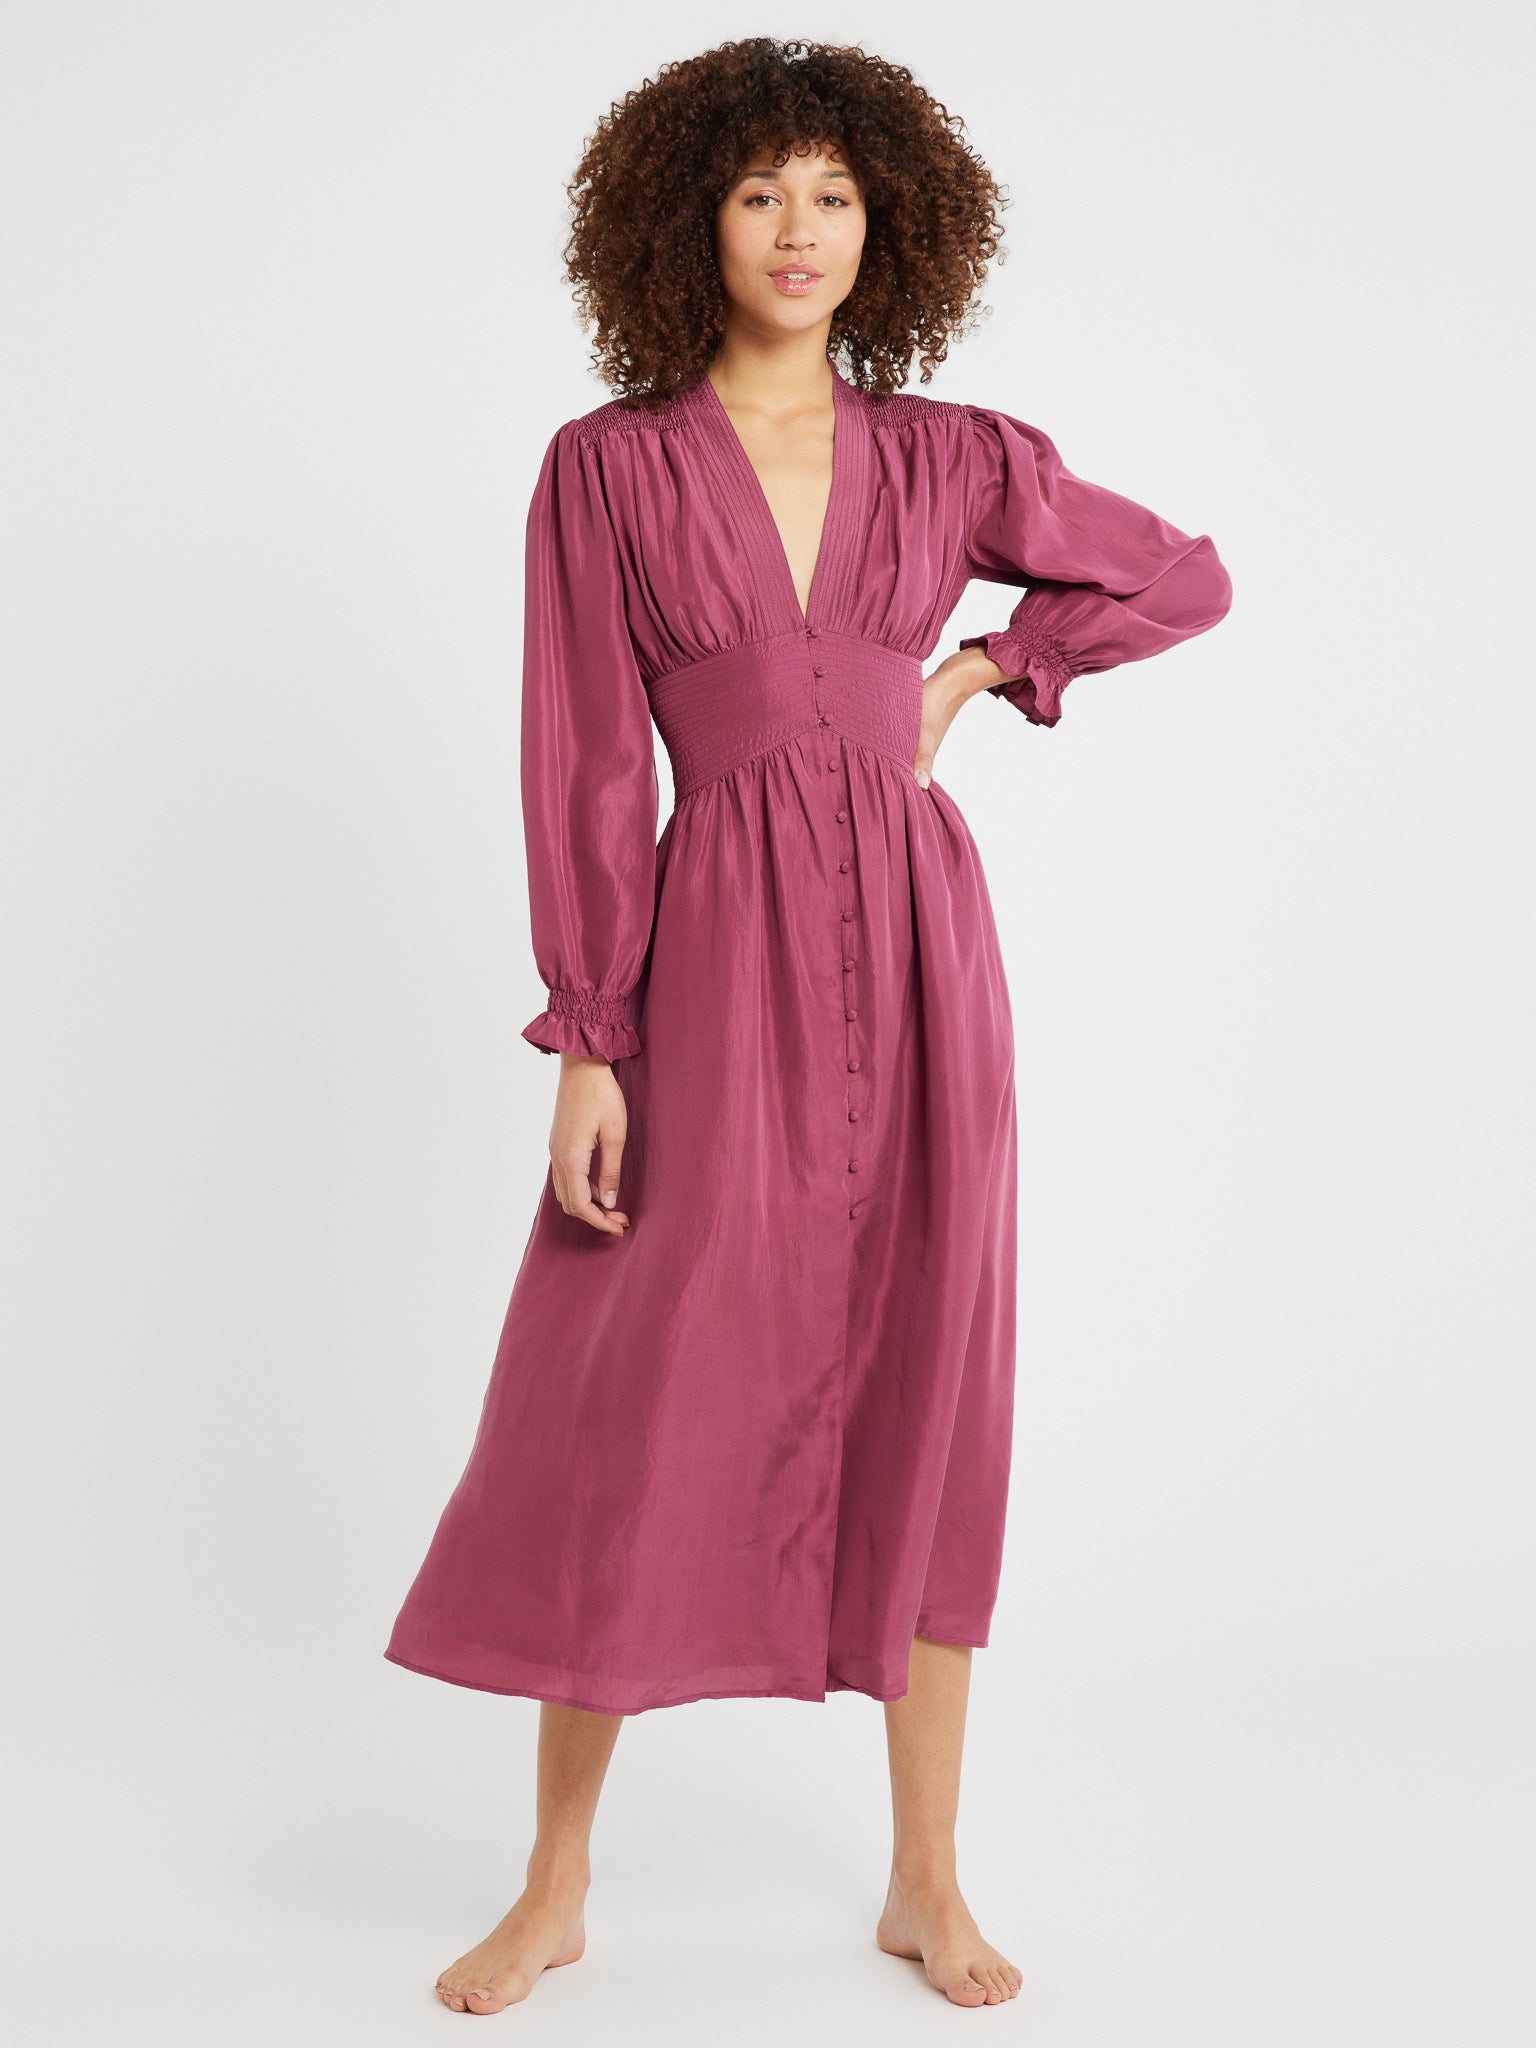 MILLE Clothing Anya Dress in Plum Washed Silk